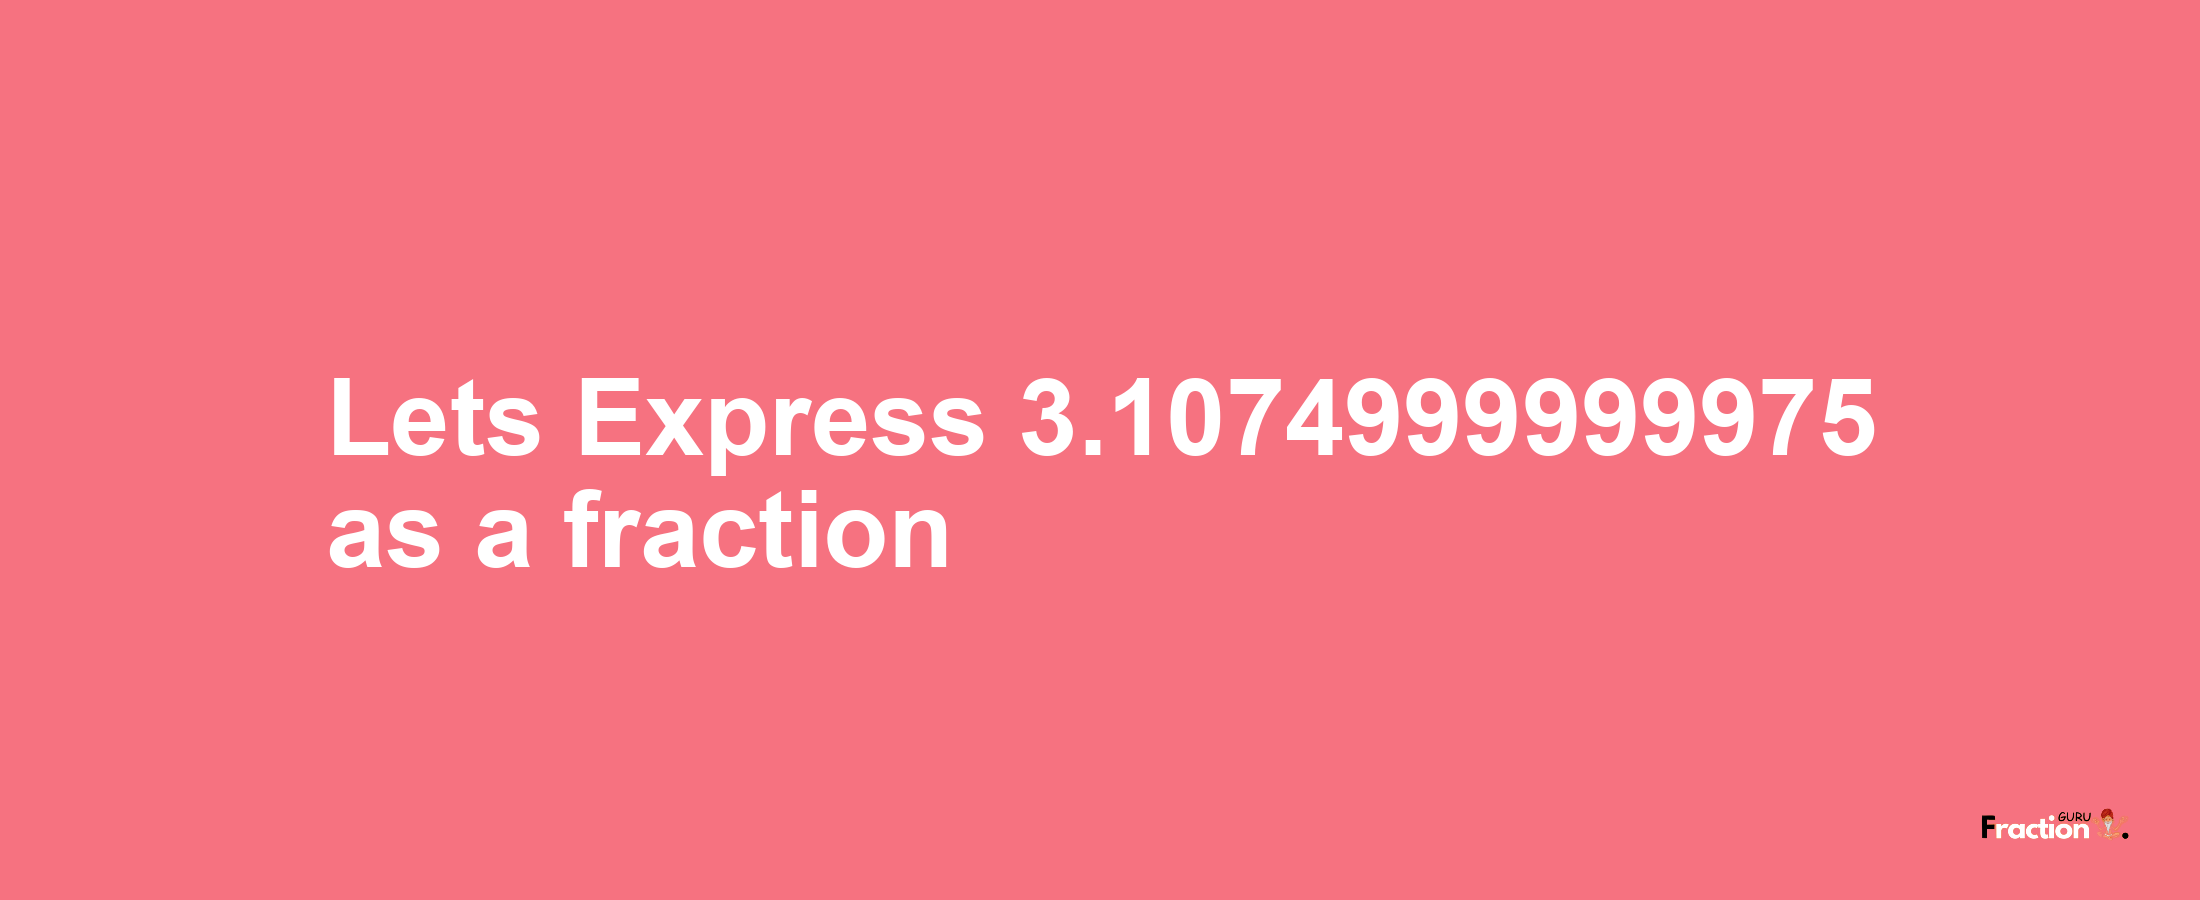 Lets Express 3.1074999999975 as afraction